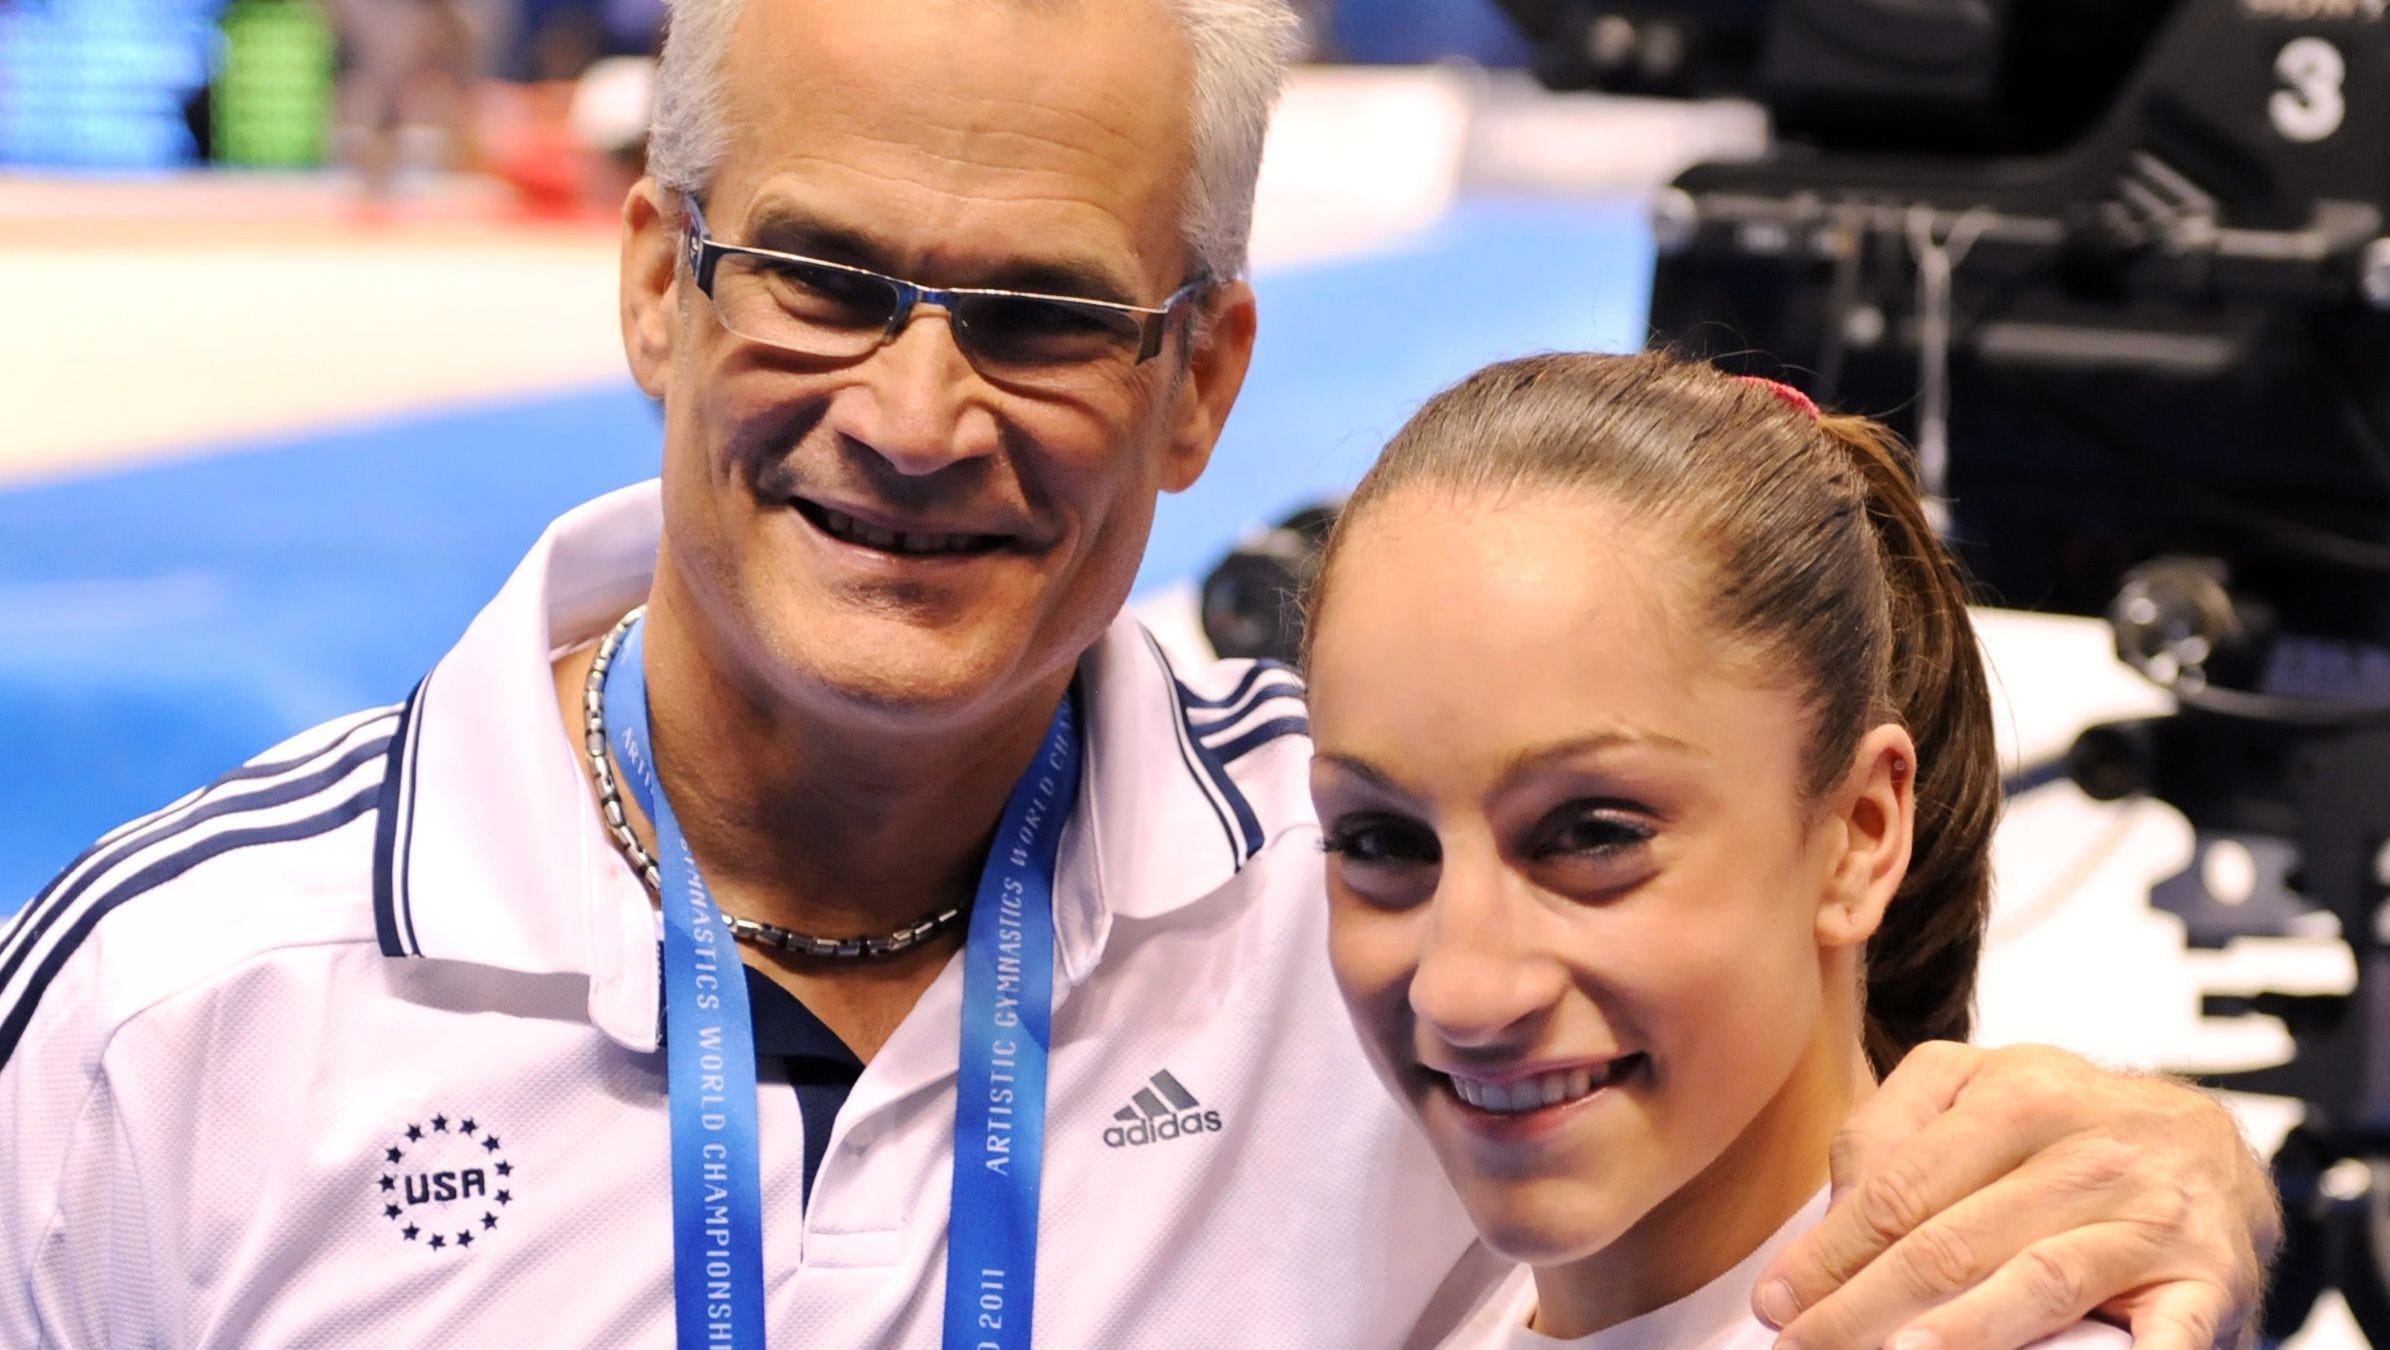 U.S. gymnast Jordyn Wieber celebrating her victory with her coach John Geddert in the women's all-around final at the World Gymnastics Championships in Tokyo. Geddert, coach of the U.S. women's 2012 London Olympics gold medal team, has been suspended by USA Gymnastics pending completion of an investigation by the sport governing body He was the personal coach to Wieber, but has come under intense scrutiny because of close personal and professional relationships to Larry Nassar, the former national team doctor convicted of sexual abuse of young gymnasts under the guise of medical treatment.